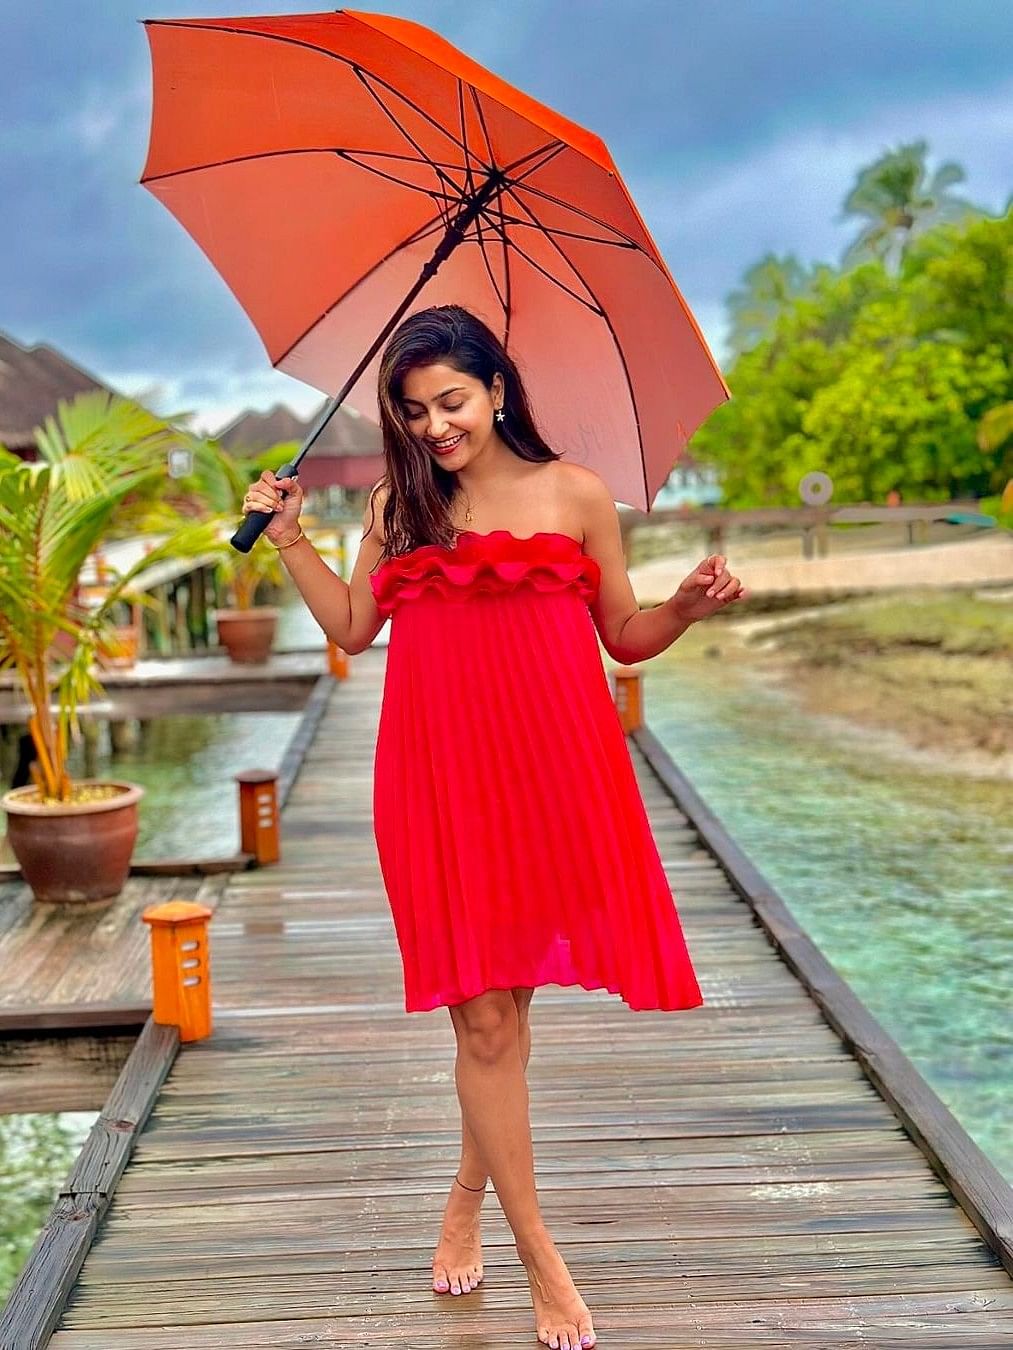 Actress Avantika Mishra has captured the hearts of netizens with her stunning snapshots from her Maldives vacation.